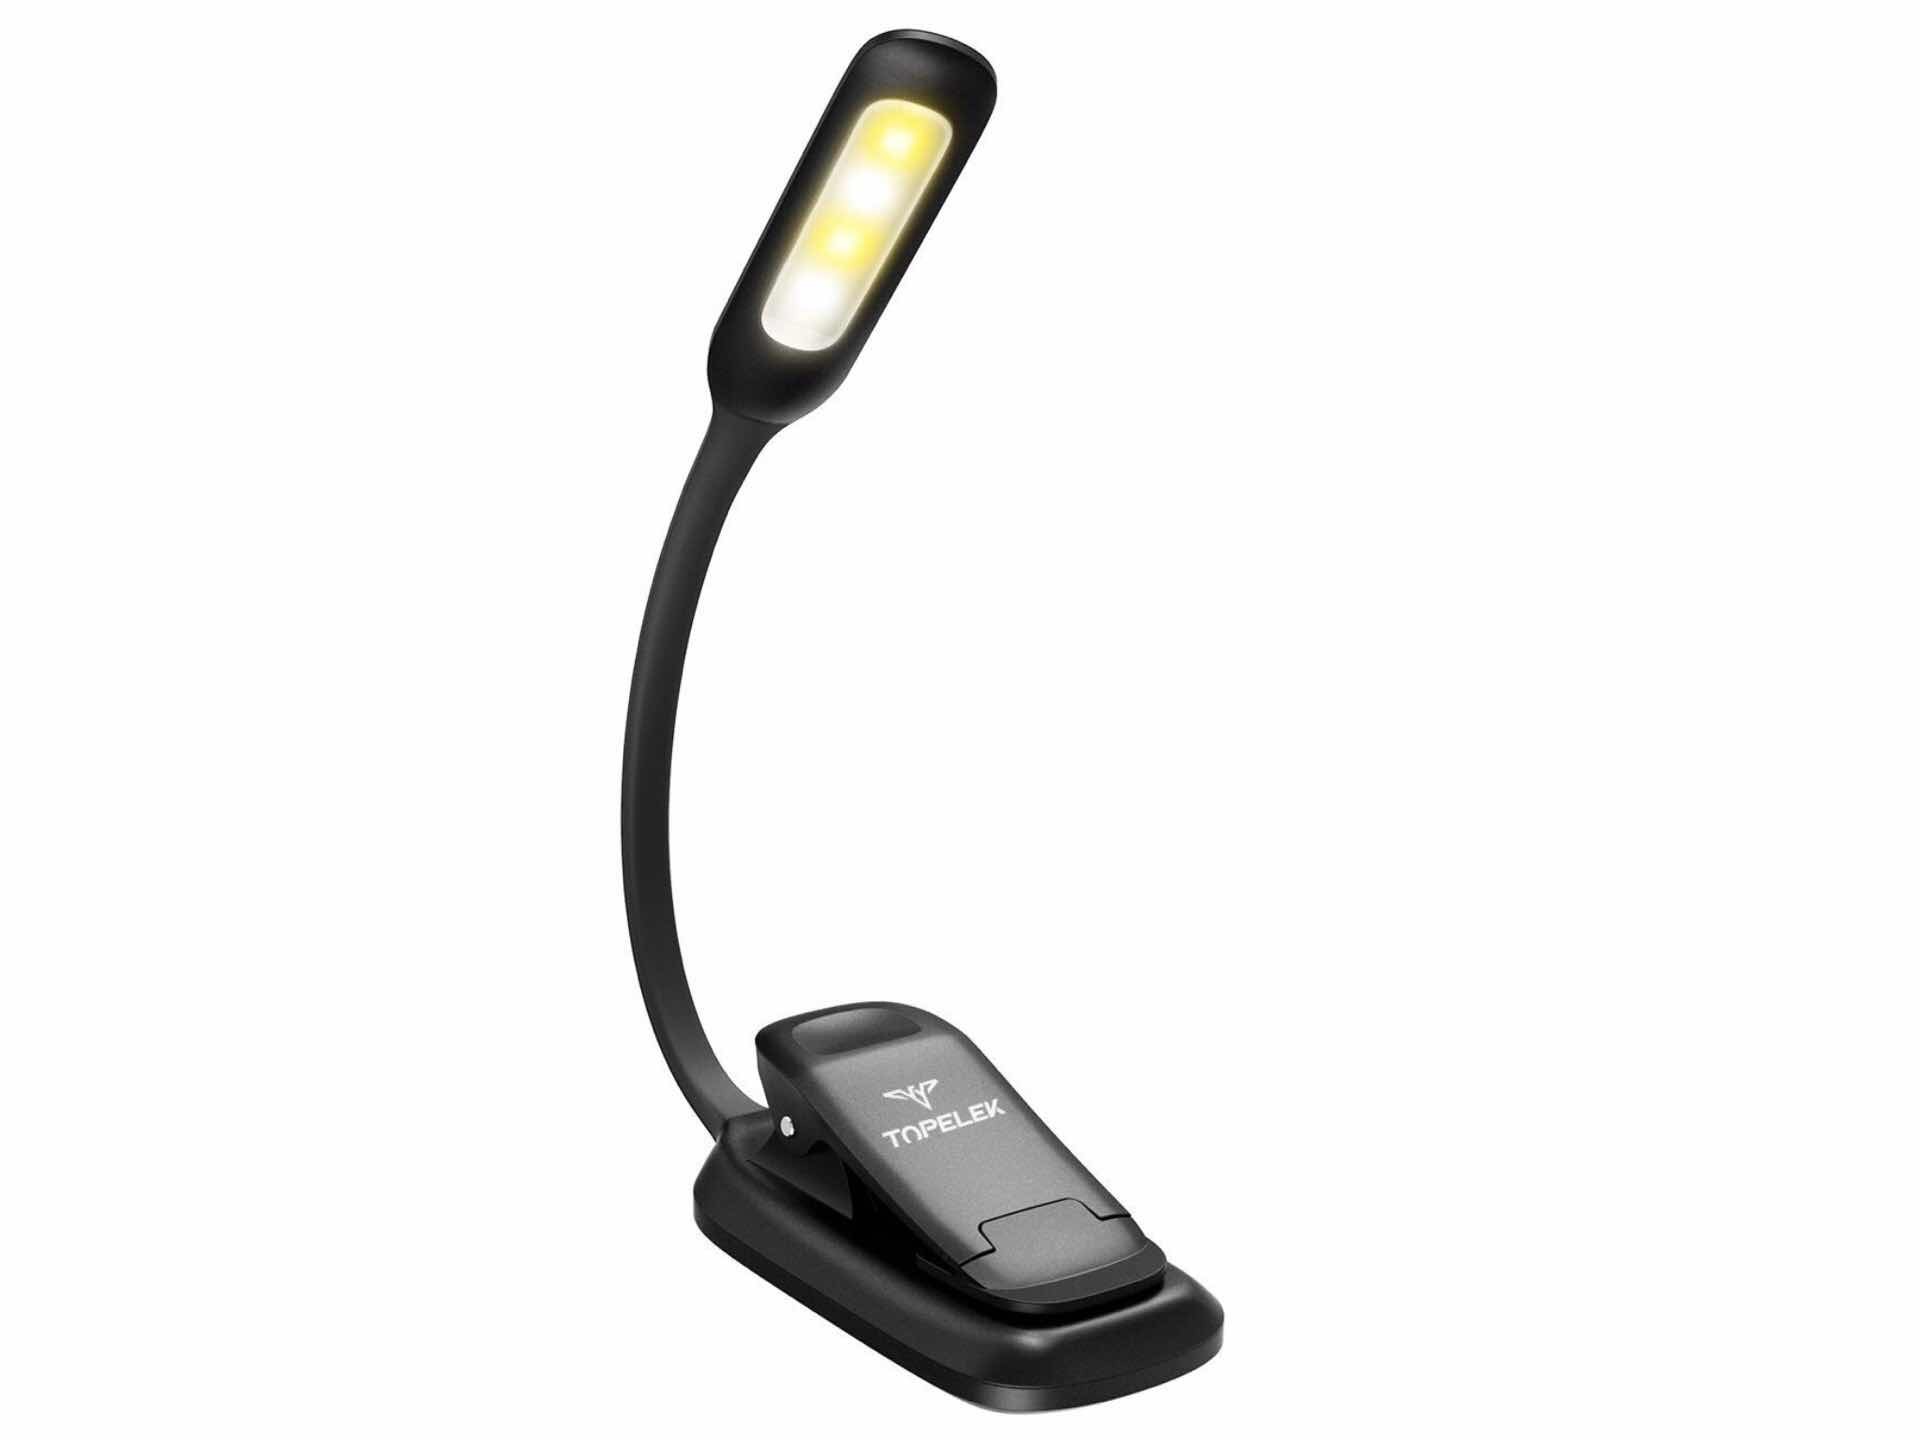 TopElek rechargeable book light. ($11)